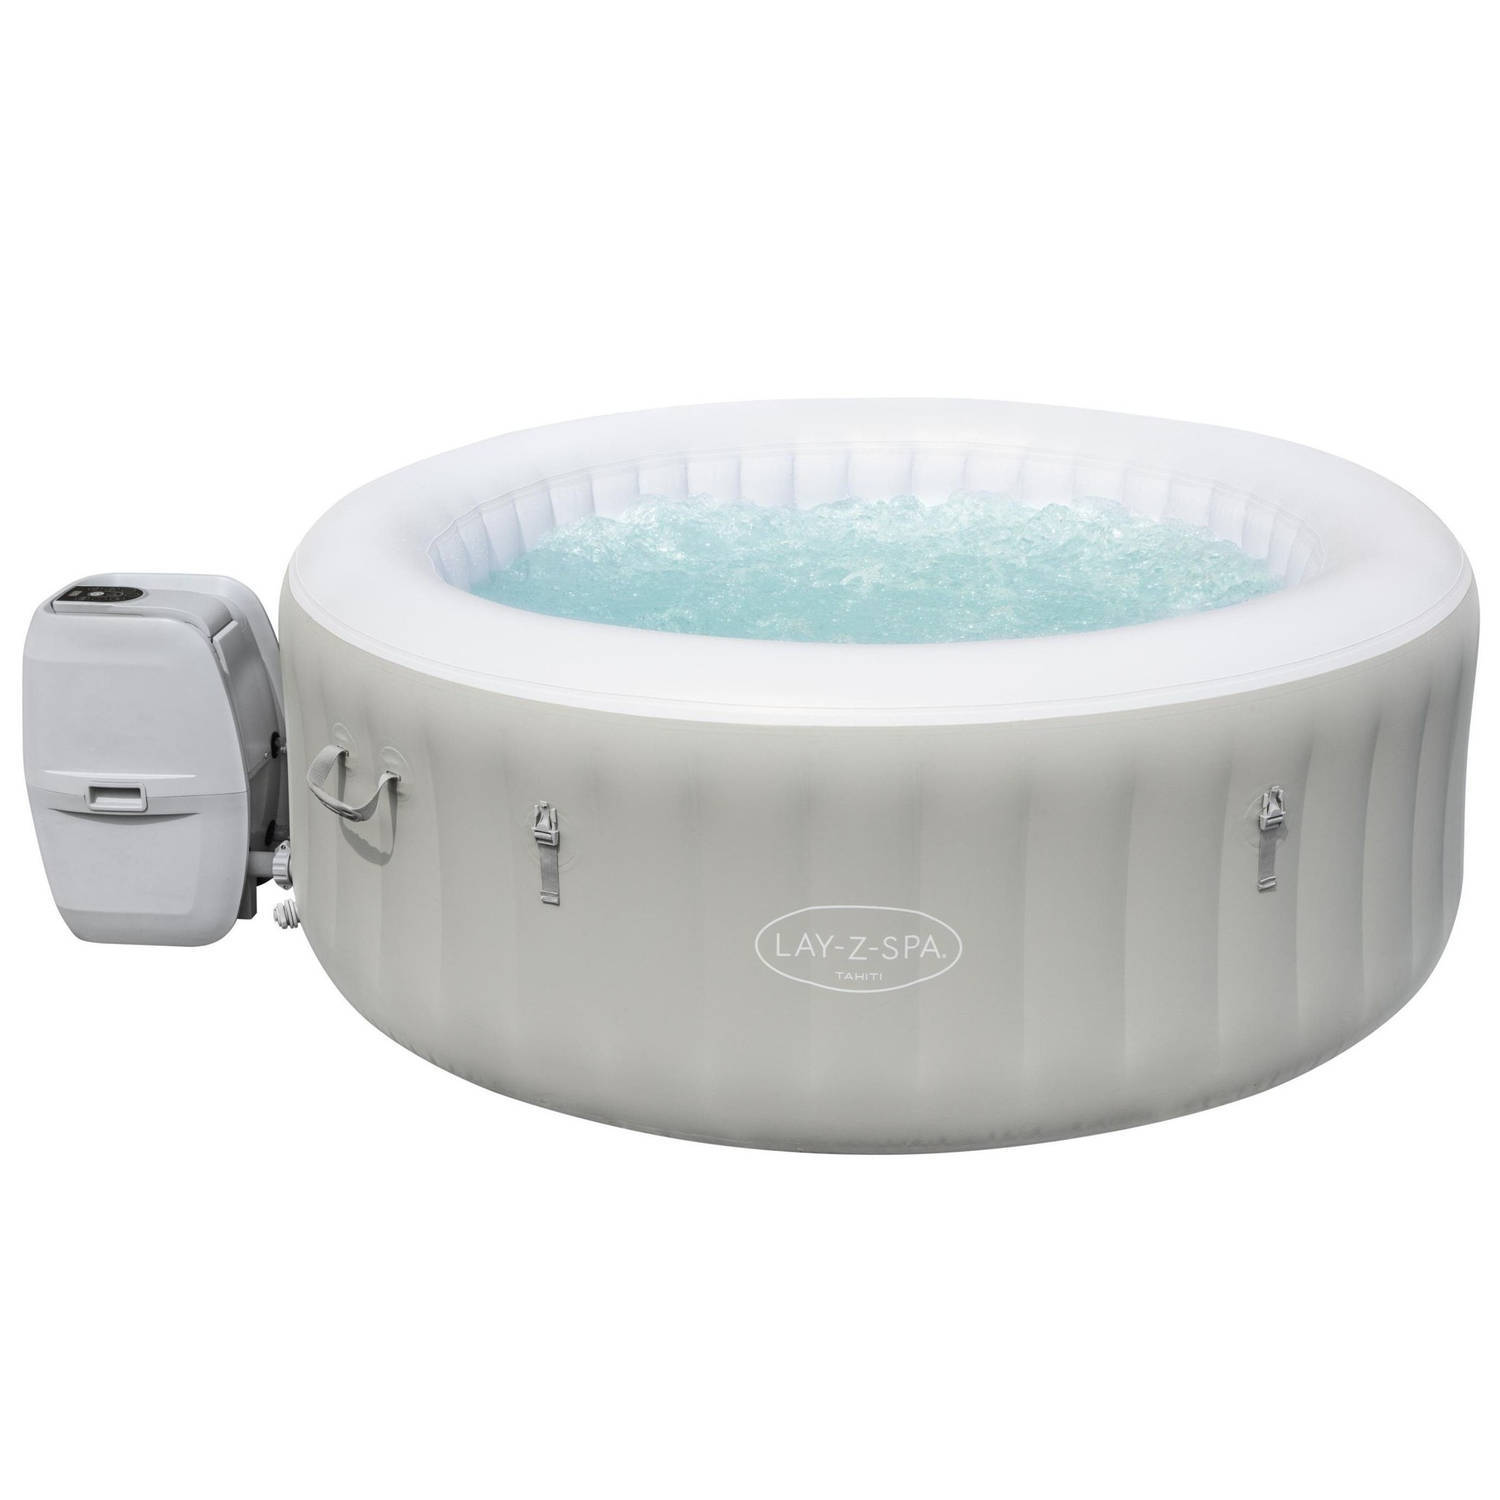 Lay-z-spa Tahiti Led Max 4 Pers 120 Airjets Jacuzzi Bubbelbad- Whirlpool Copy Copy